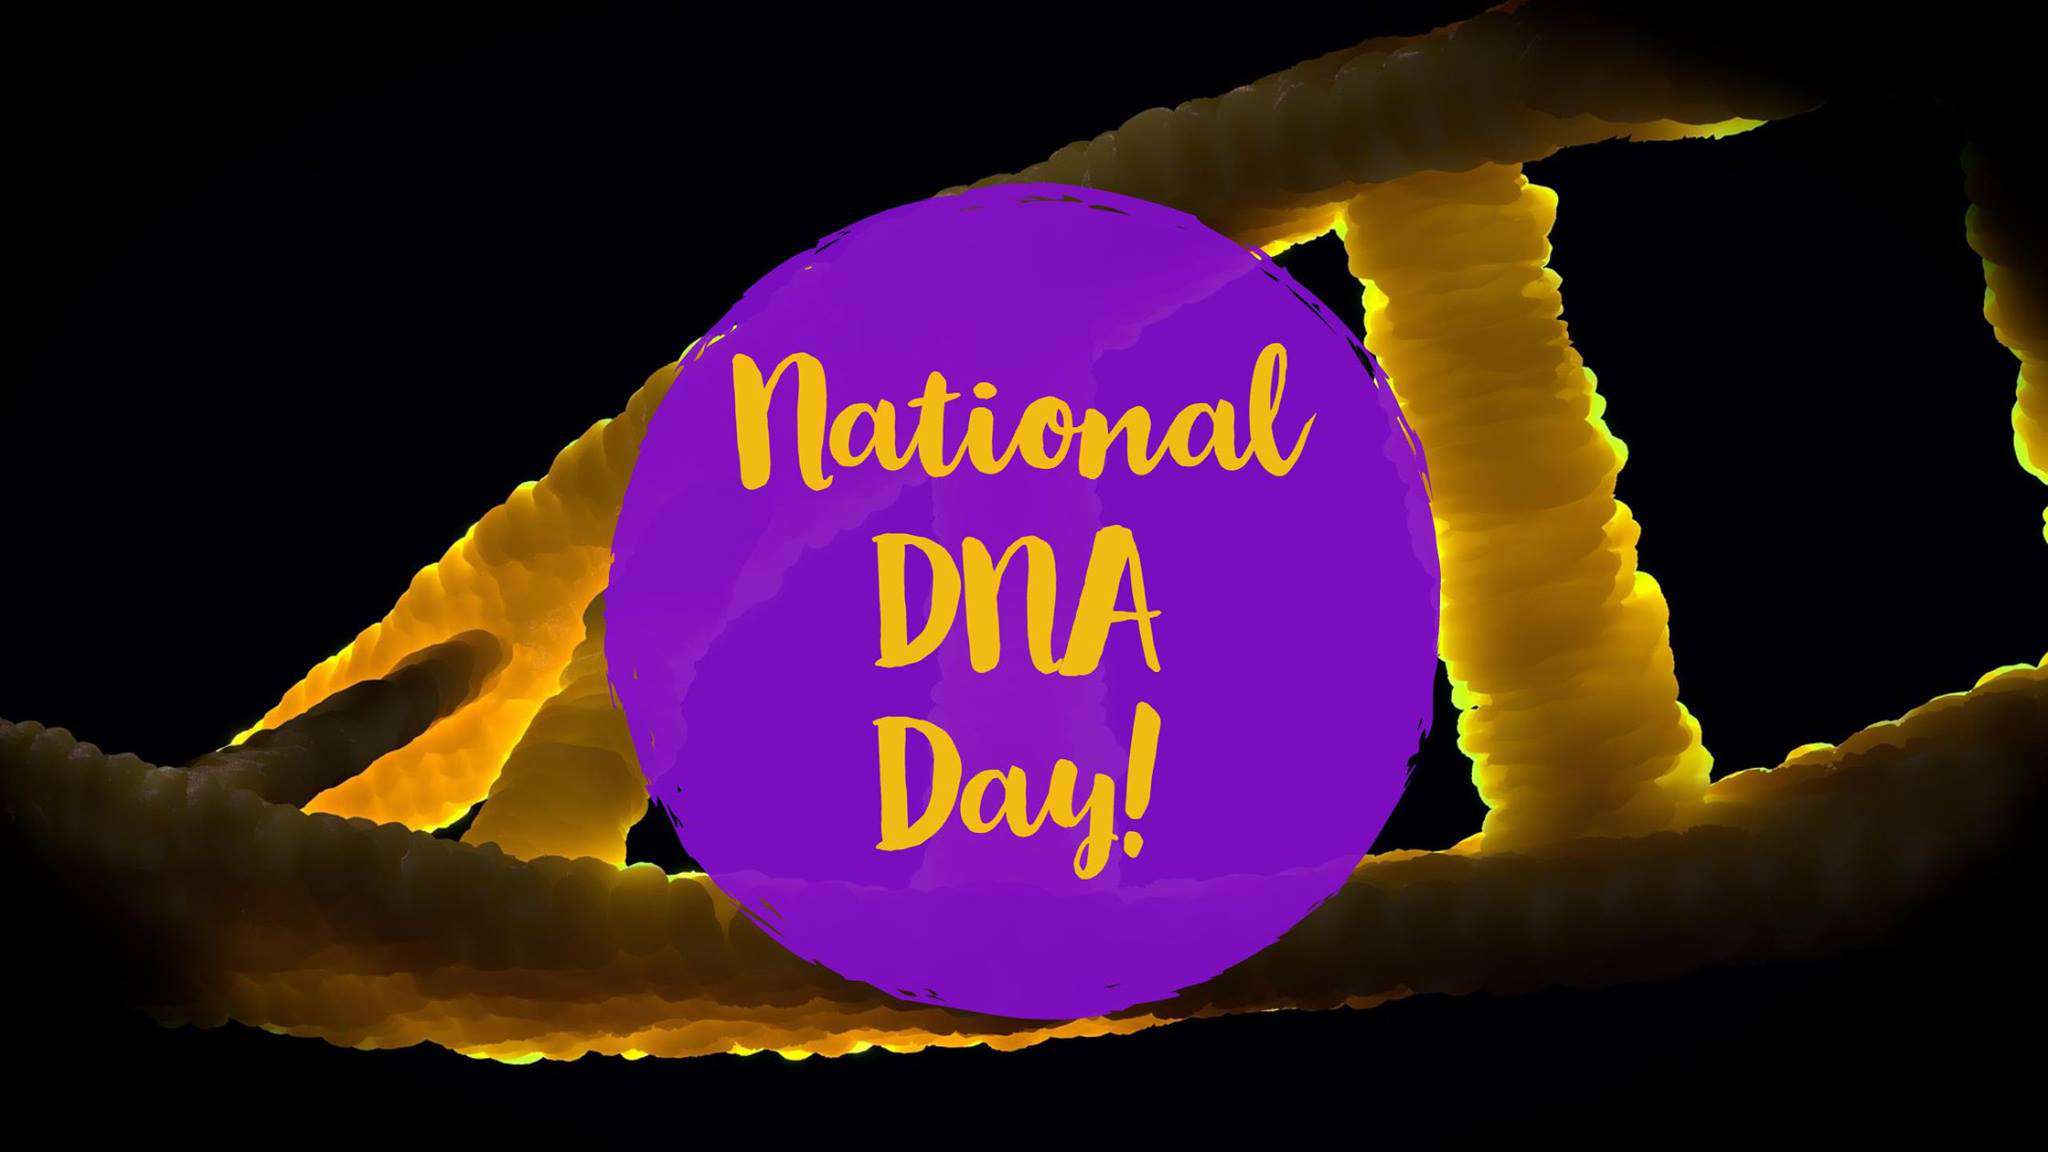 National DNA Day Wishes Images download